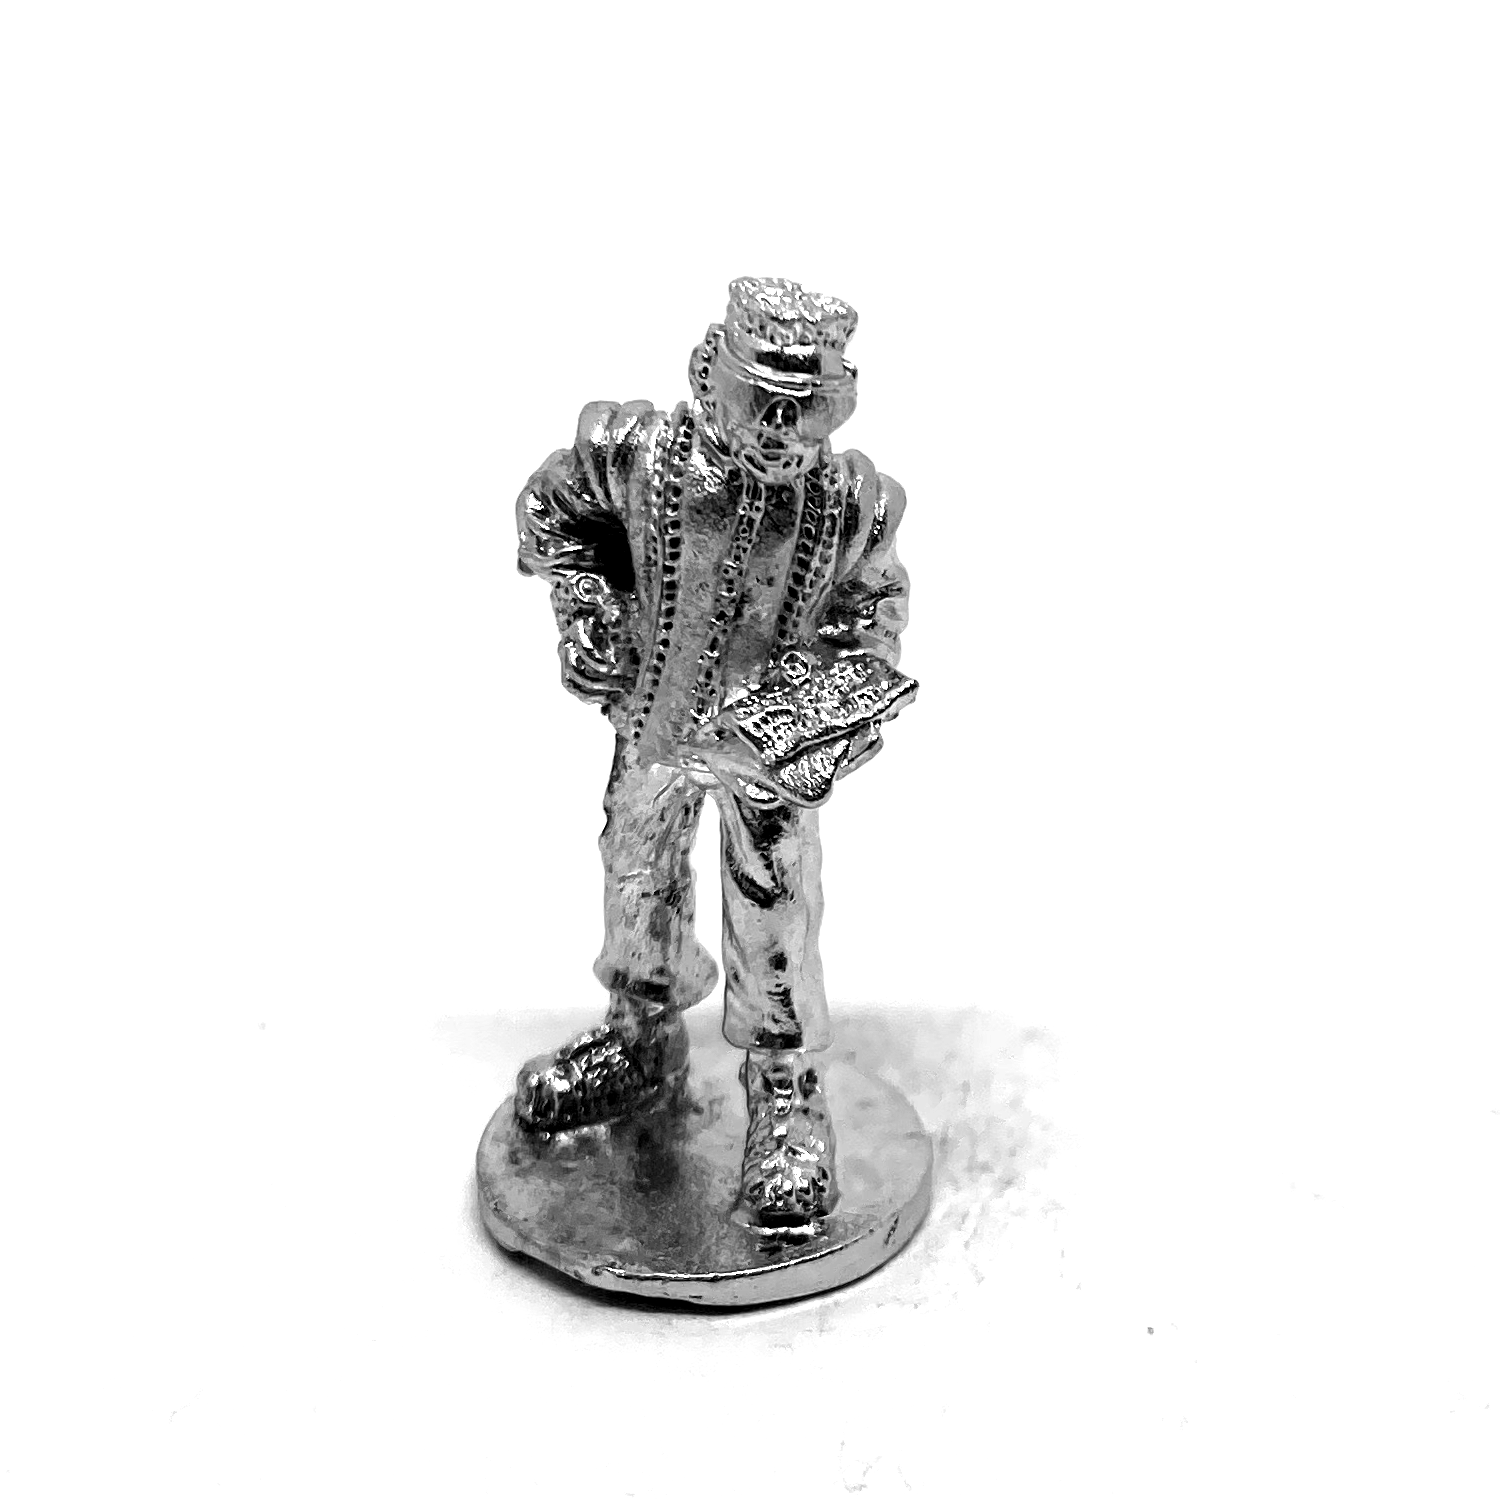 What is Cthulhu? – em4miniatures